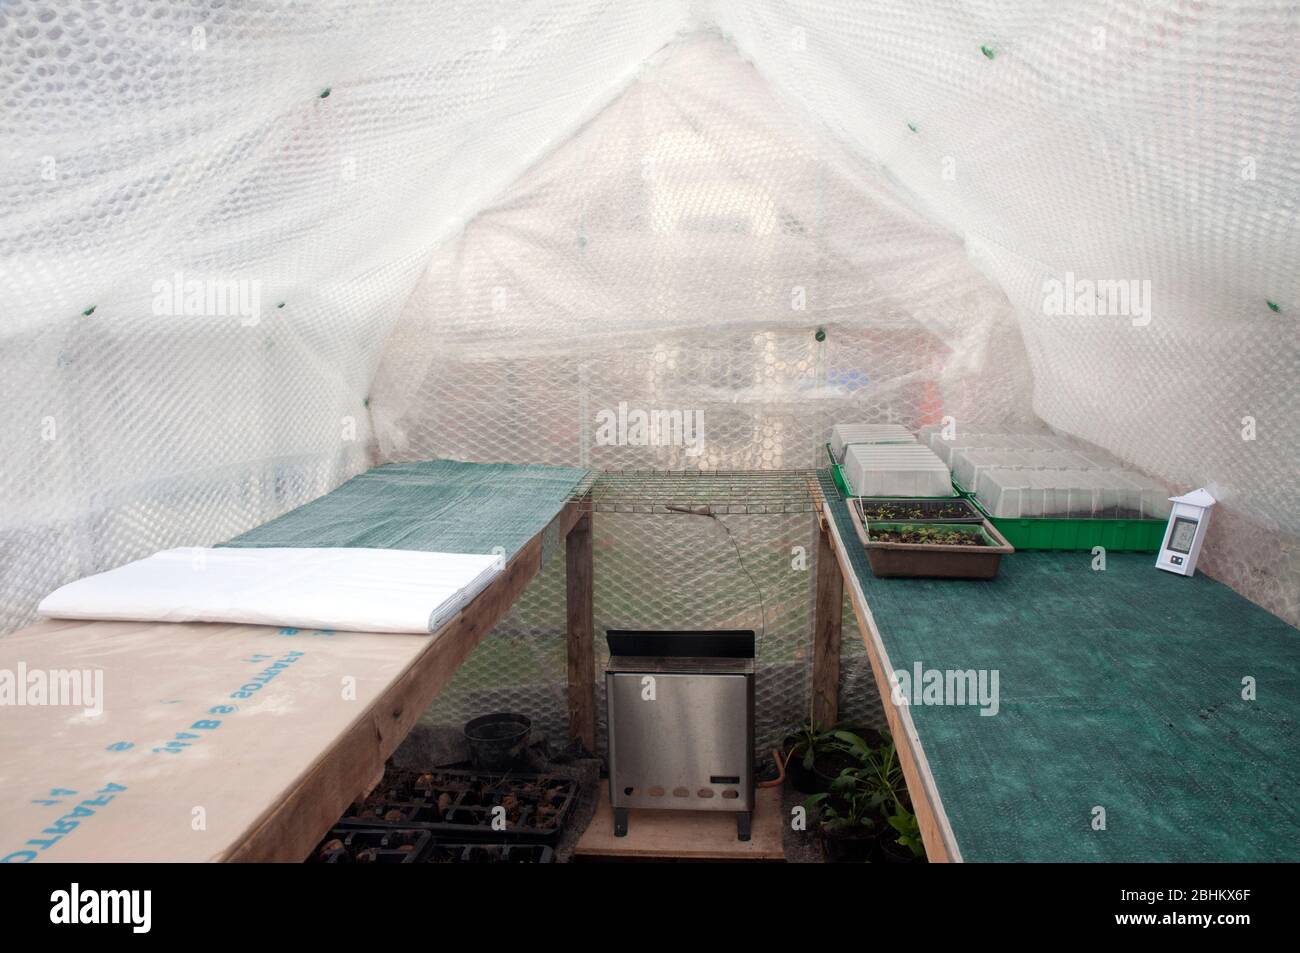 Capillary matting being liad on staging in greenhouse that is insulated with bubble wrap. Greenhouse heater and thermometer installed for seed sowing. Stock Photo